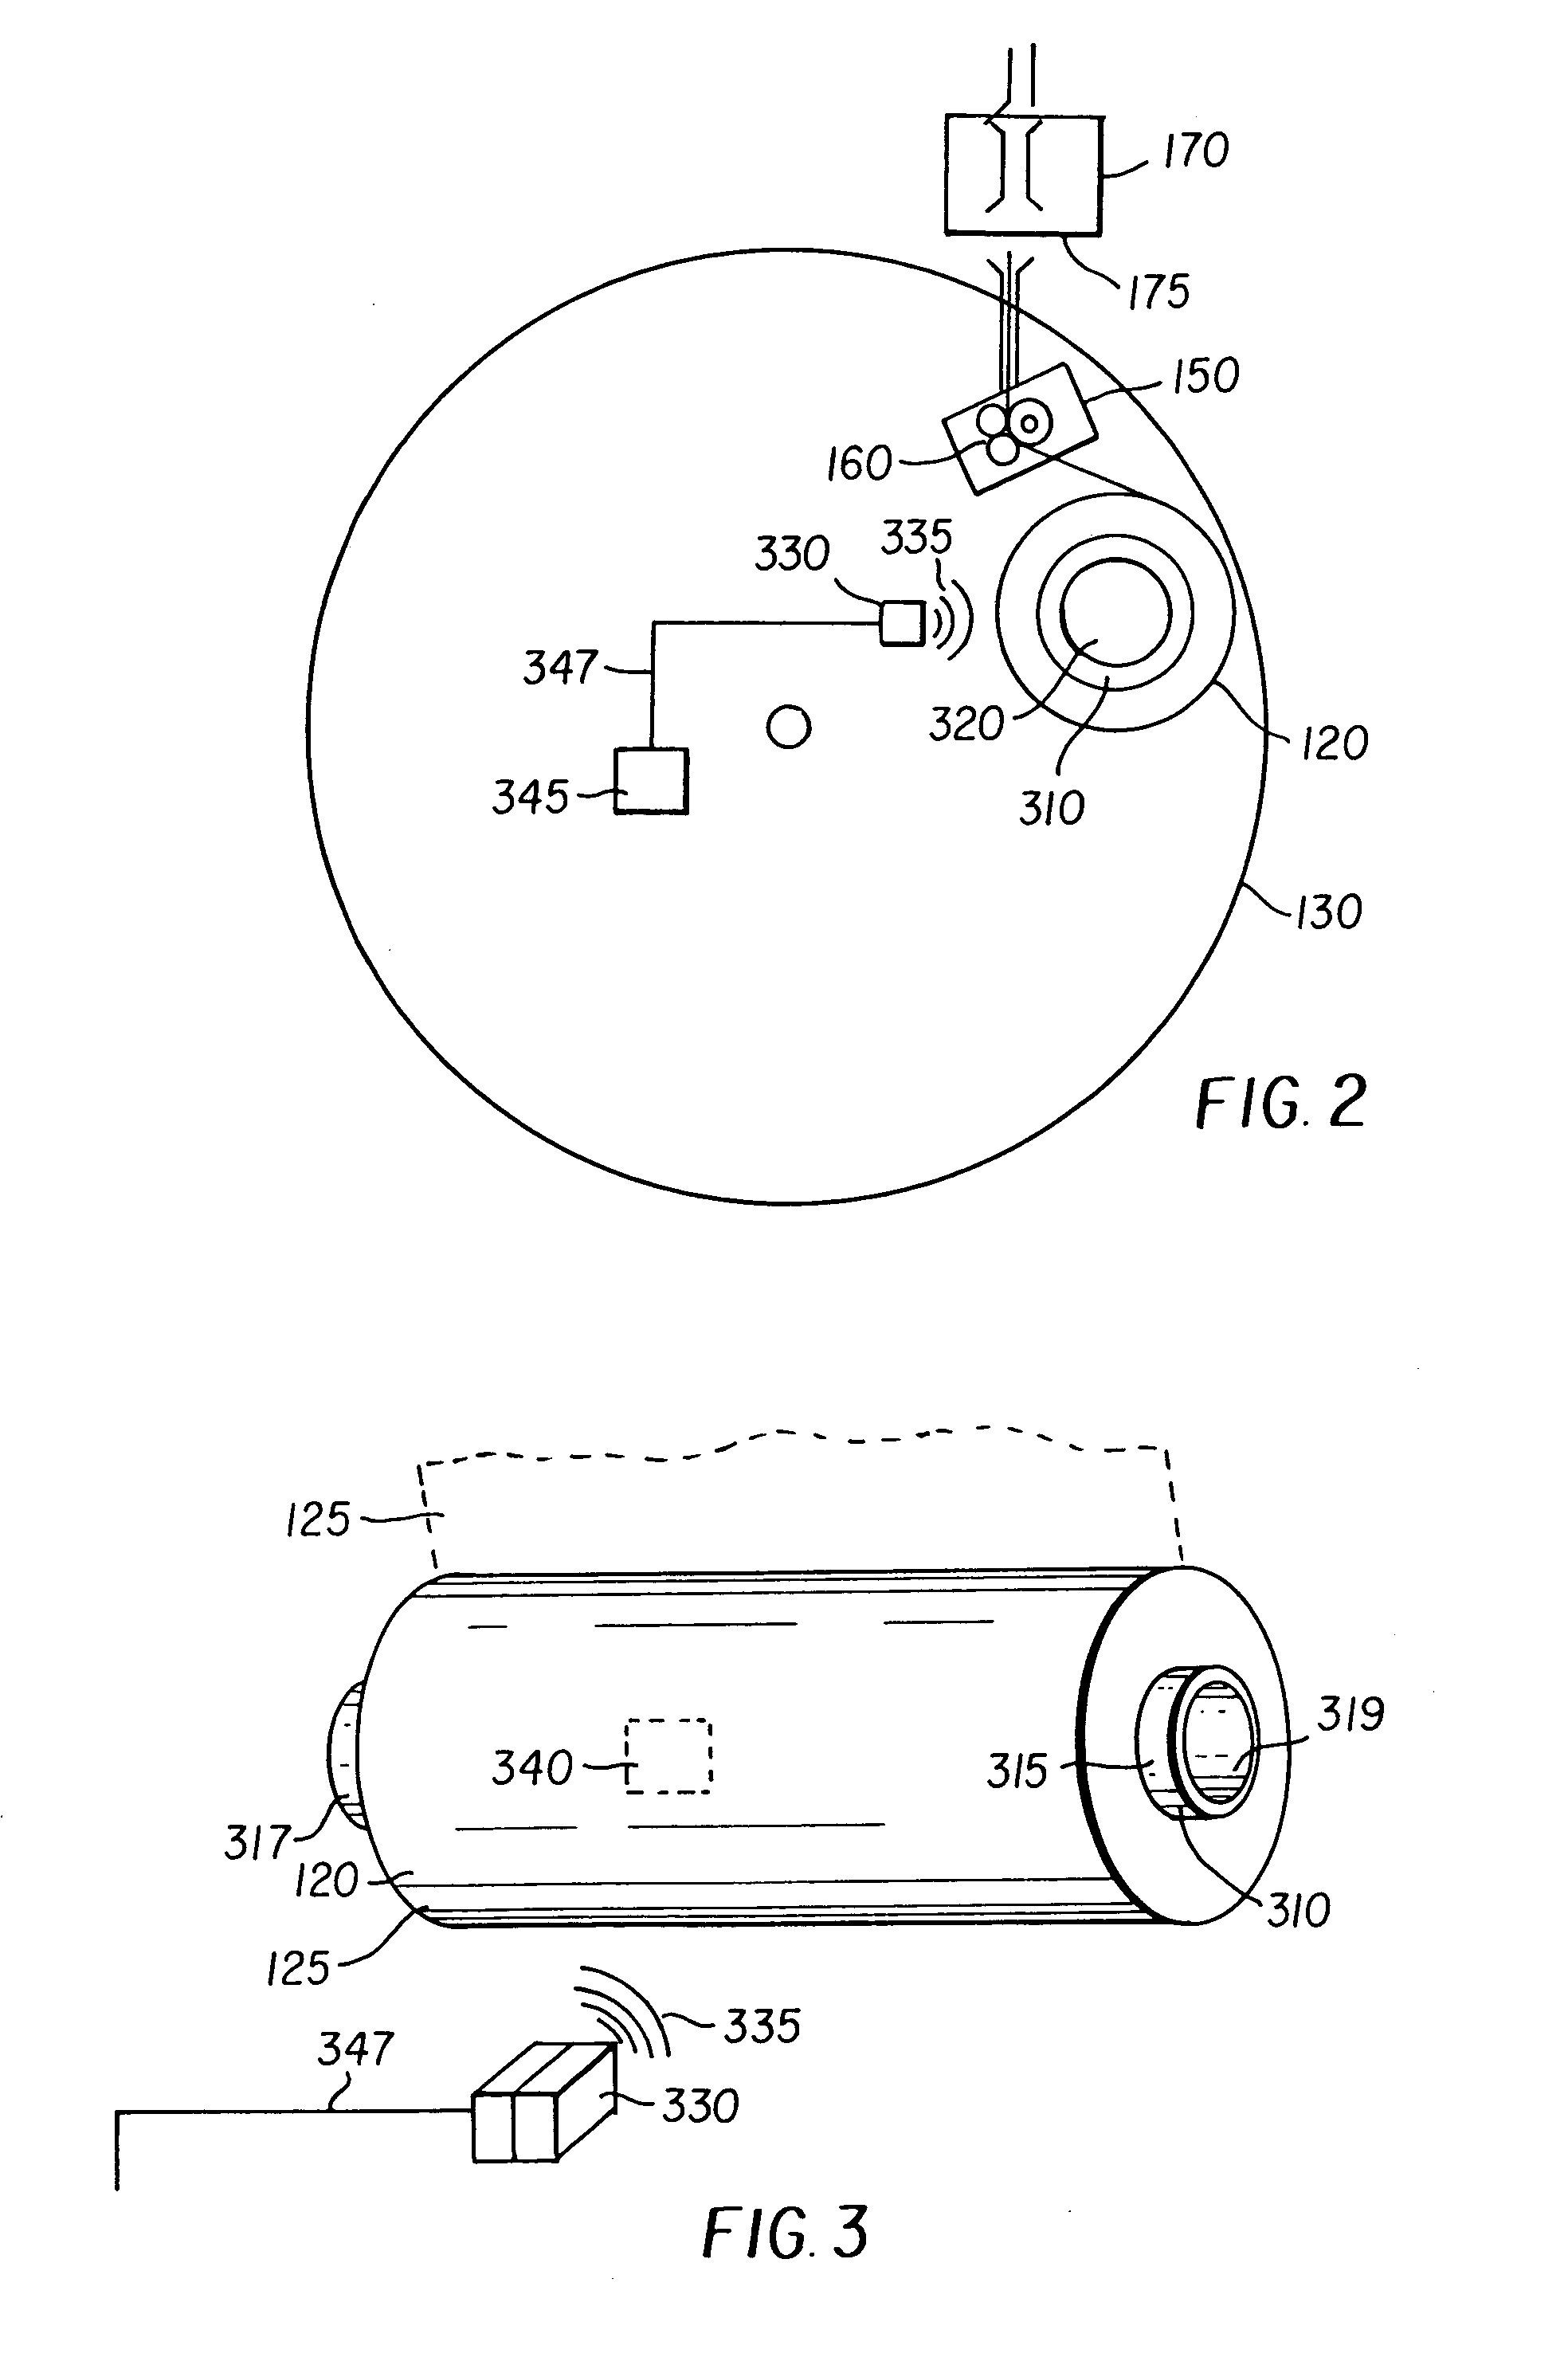 Printer media supply spool adapted to allow the printer to sense type of media, and method of assembling same